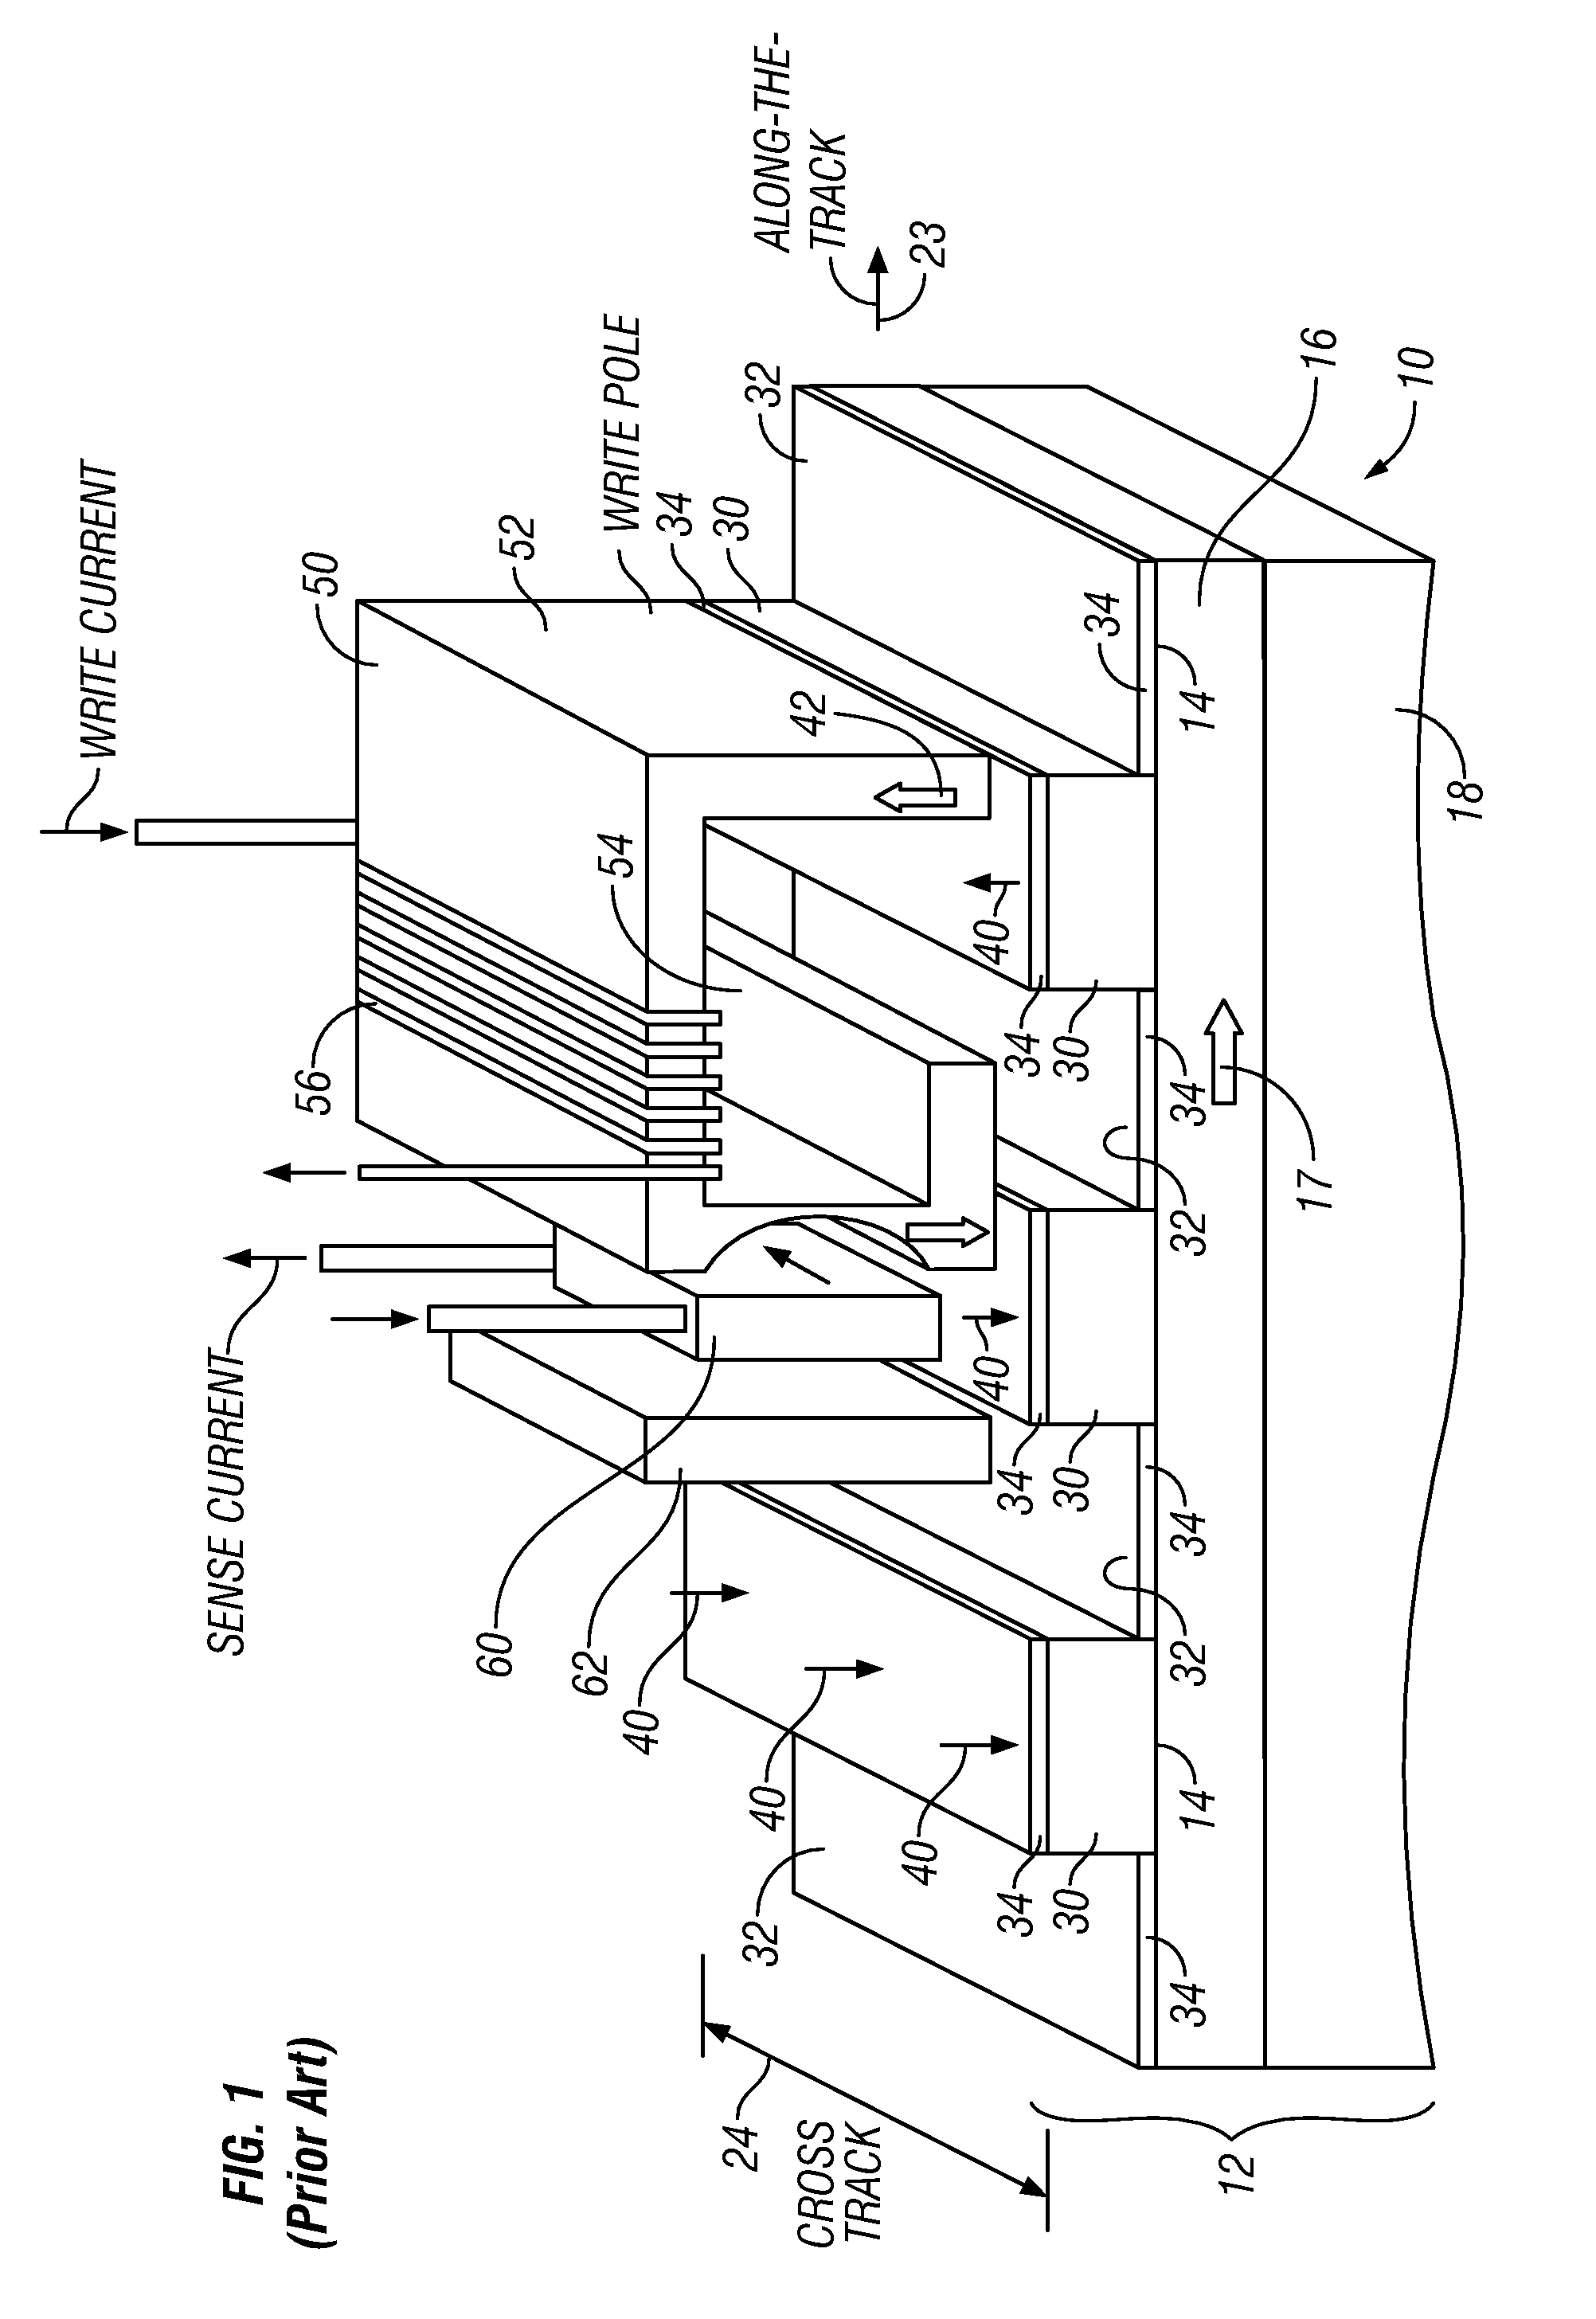 Patterned perpendicular magnetic recording medium with exchange coupled recording layer structure and magnetic recording system using the medium